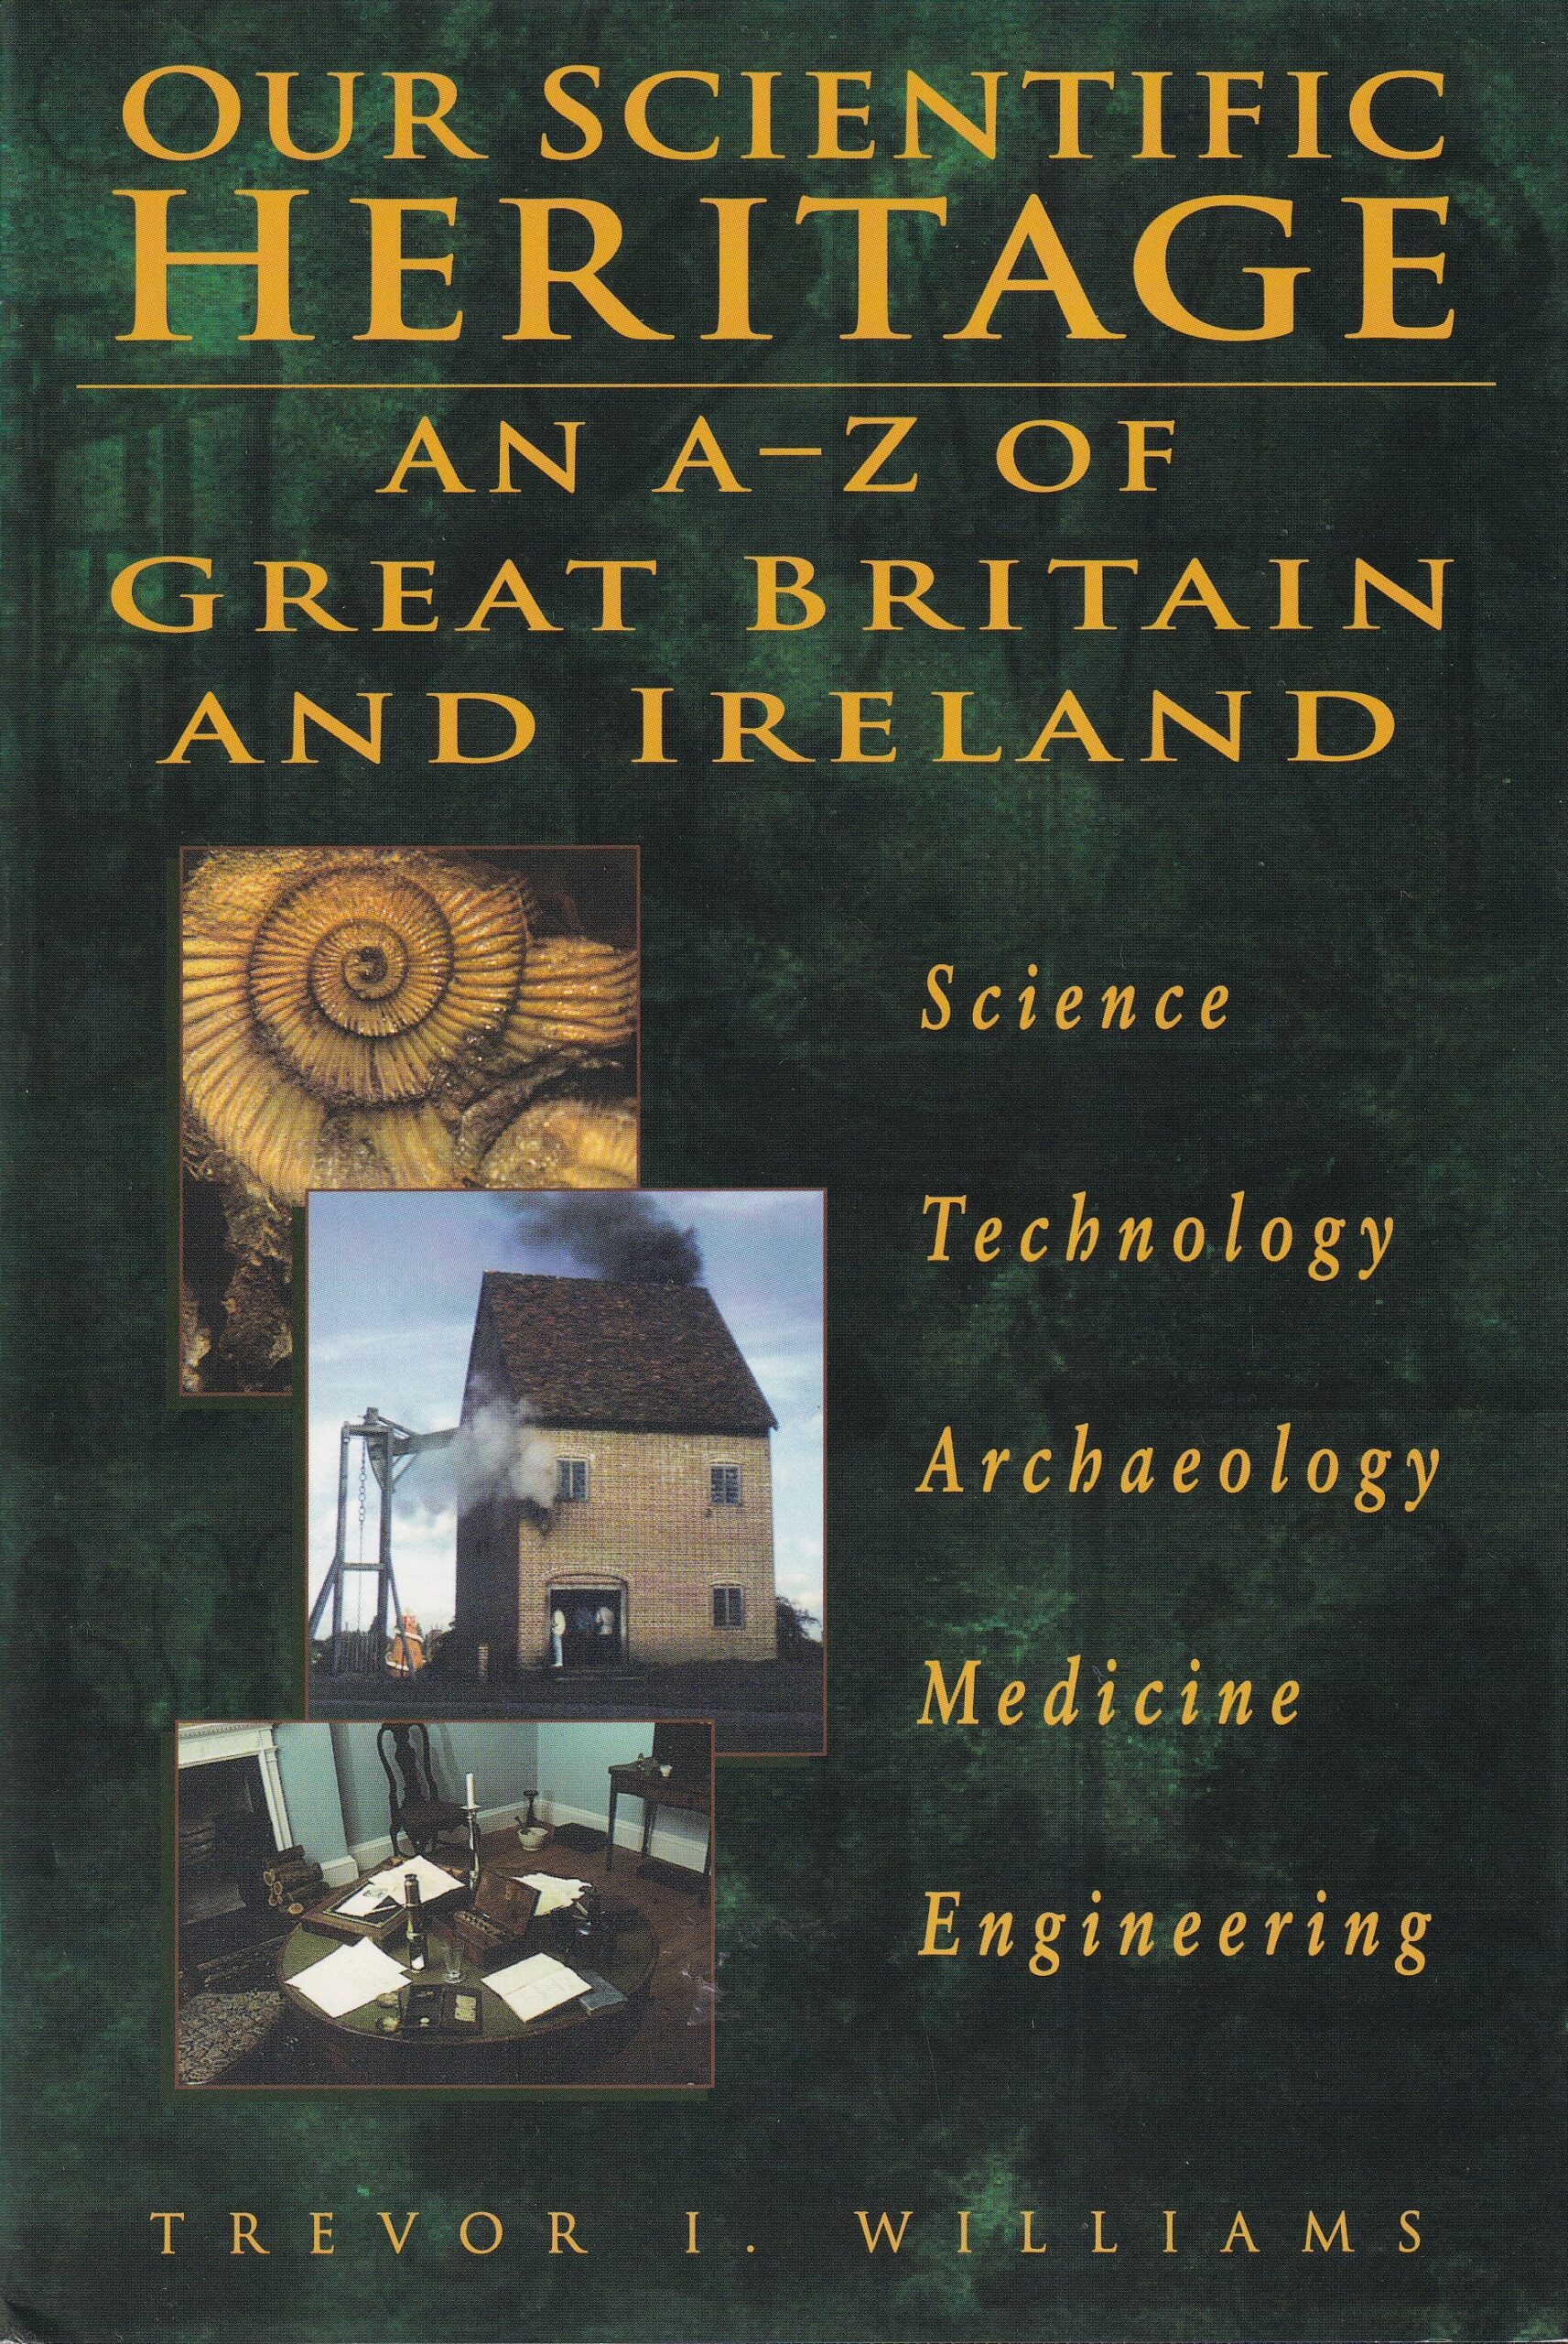 Our Scientific Heritage: An A-Z of Great Britain and Ireland by Trevor I. Williams